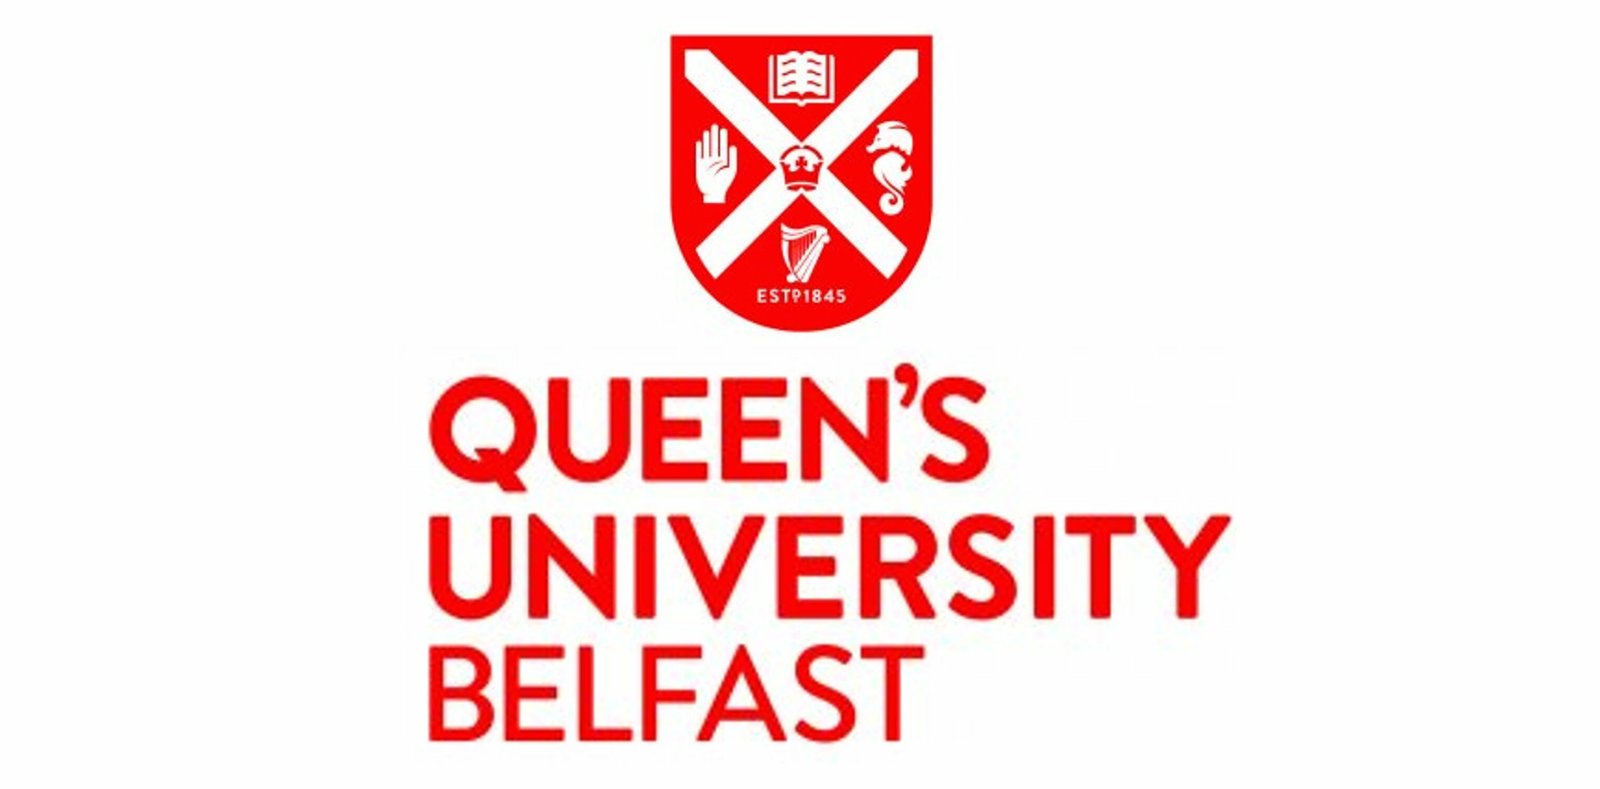 Fully Funded PhD Programs at Queen's University Belfast